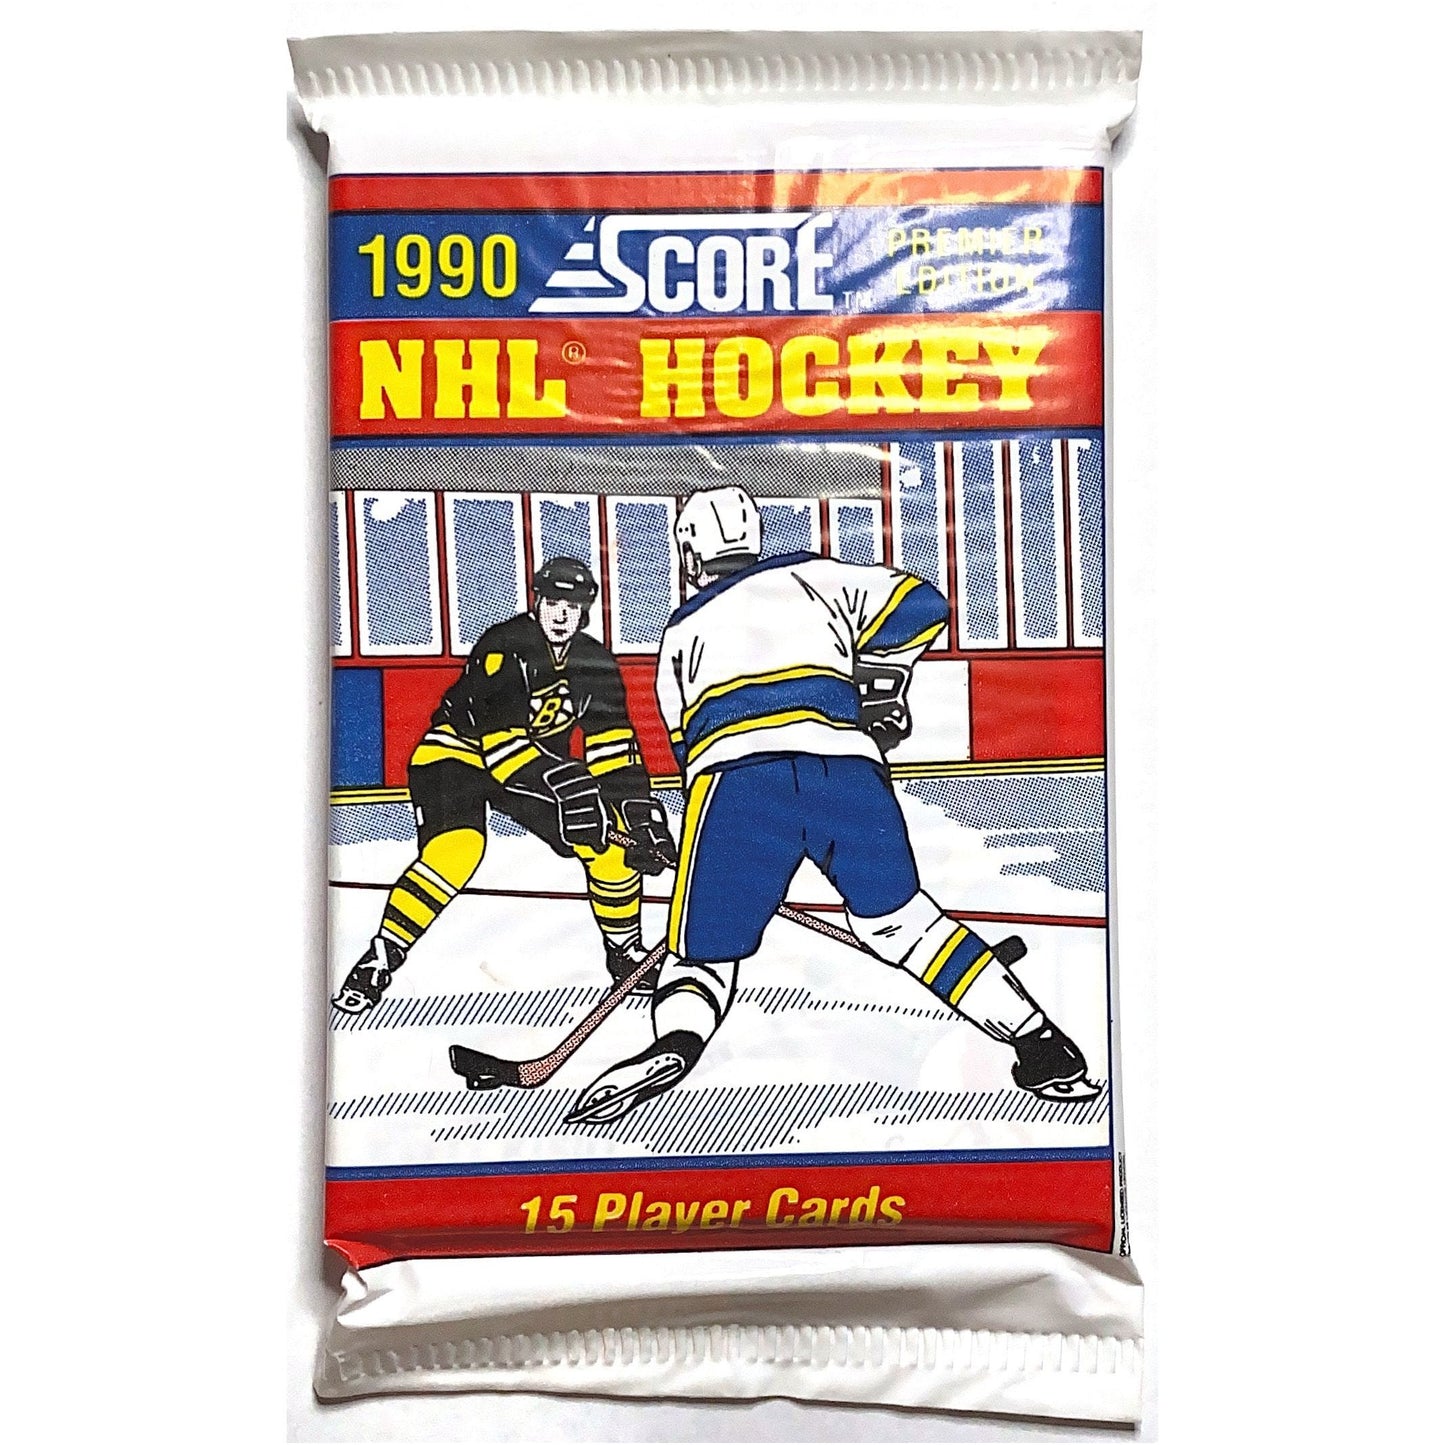  1990 Score Hockey Premier Edition Pack  Local Legends Cards & Collectibles